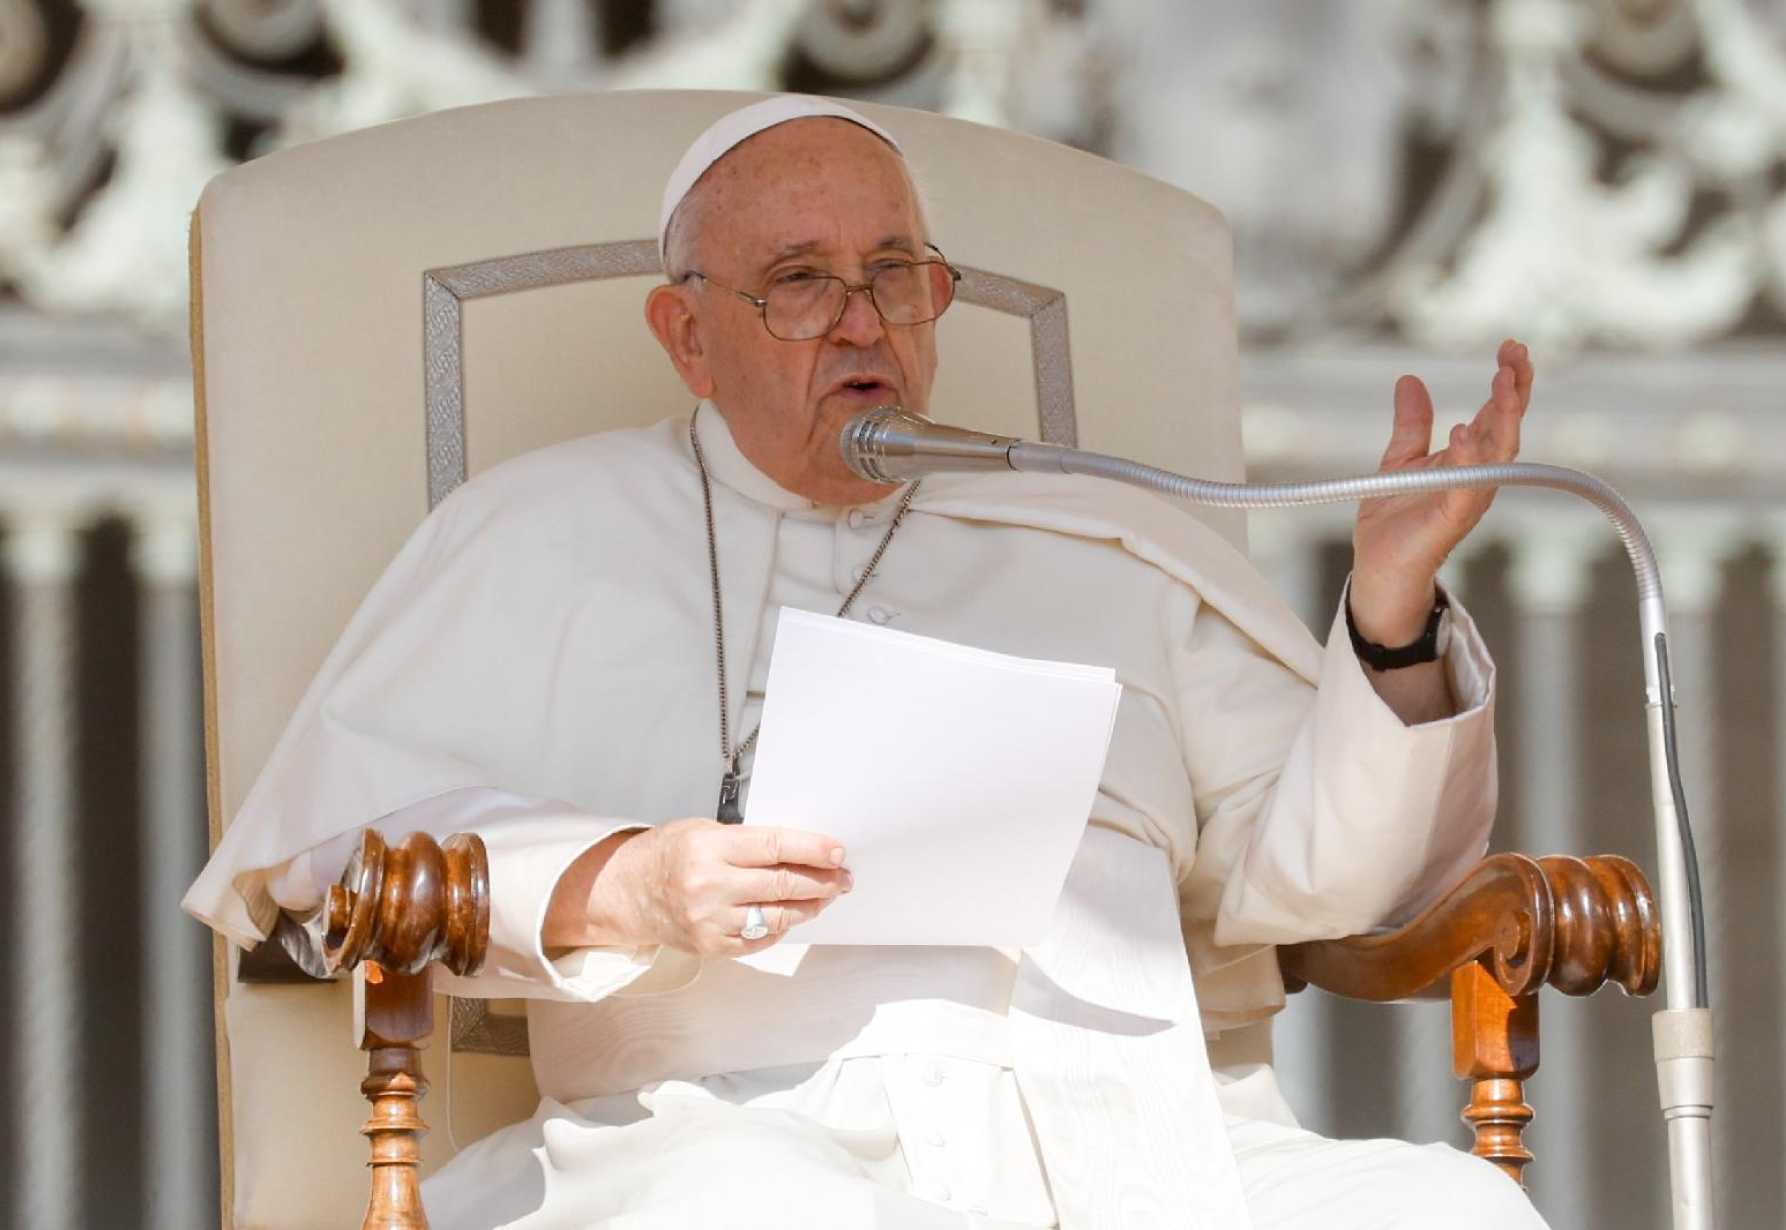 Pope recounts the joy, goodness, humility he saw in Mongolia